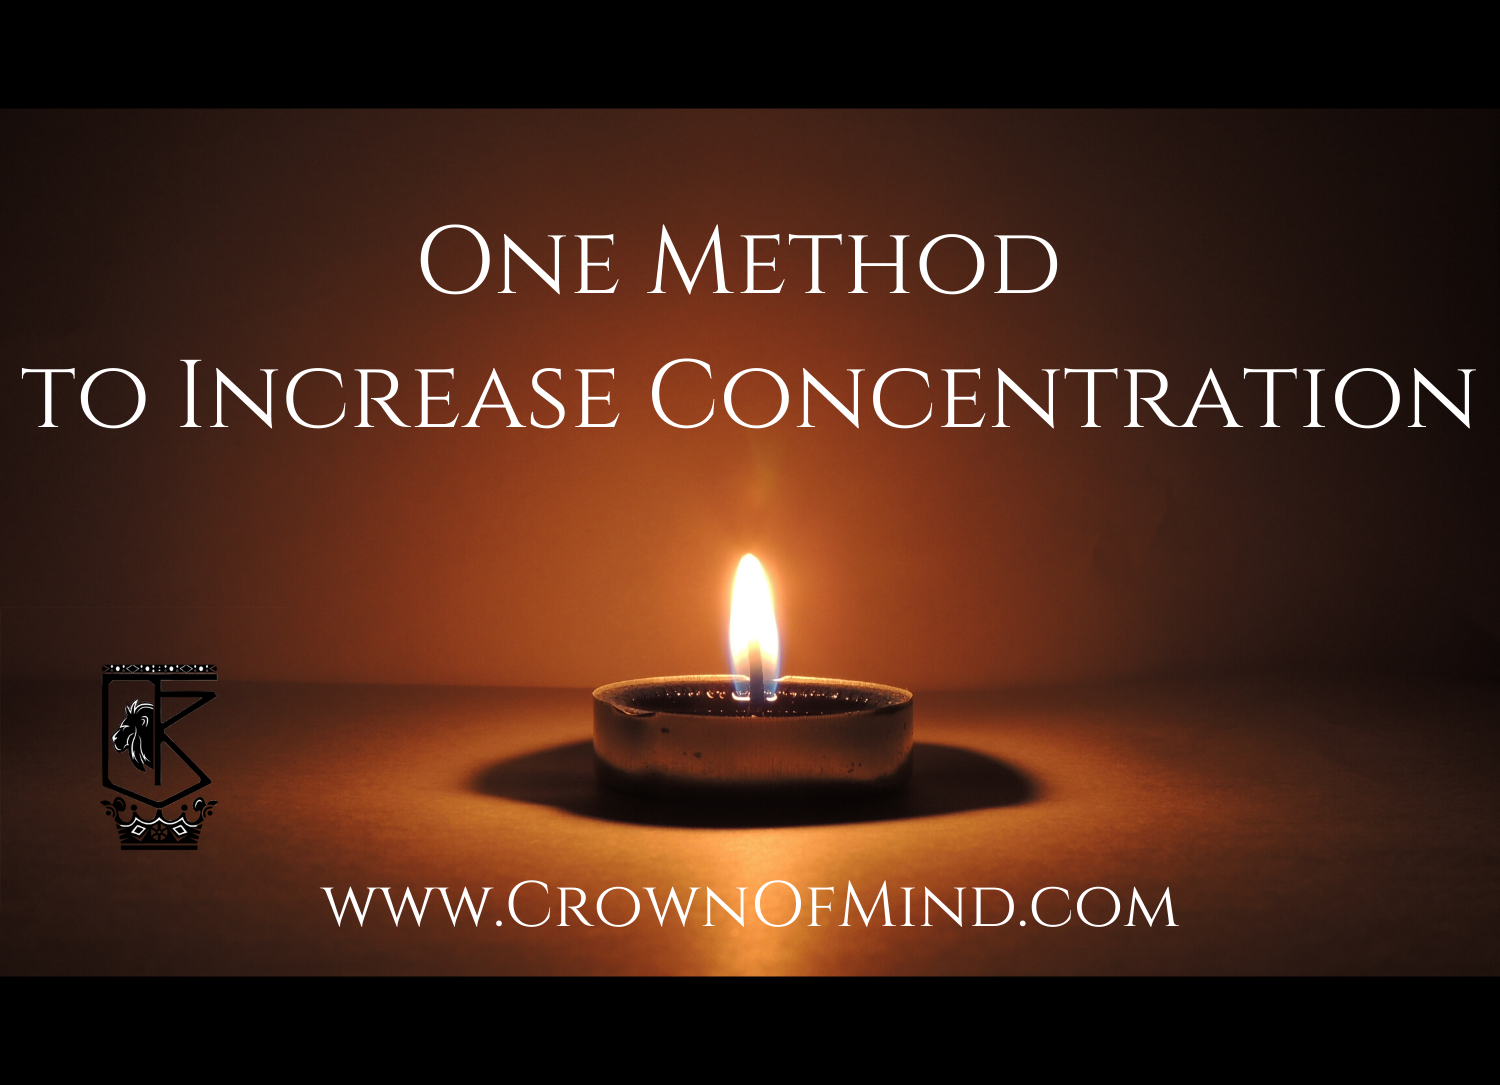 One Method to Increase Concentration